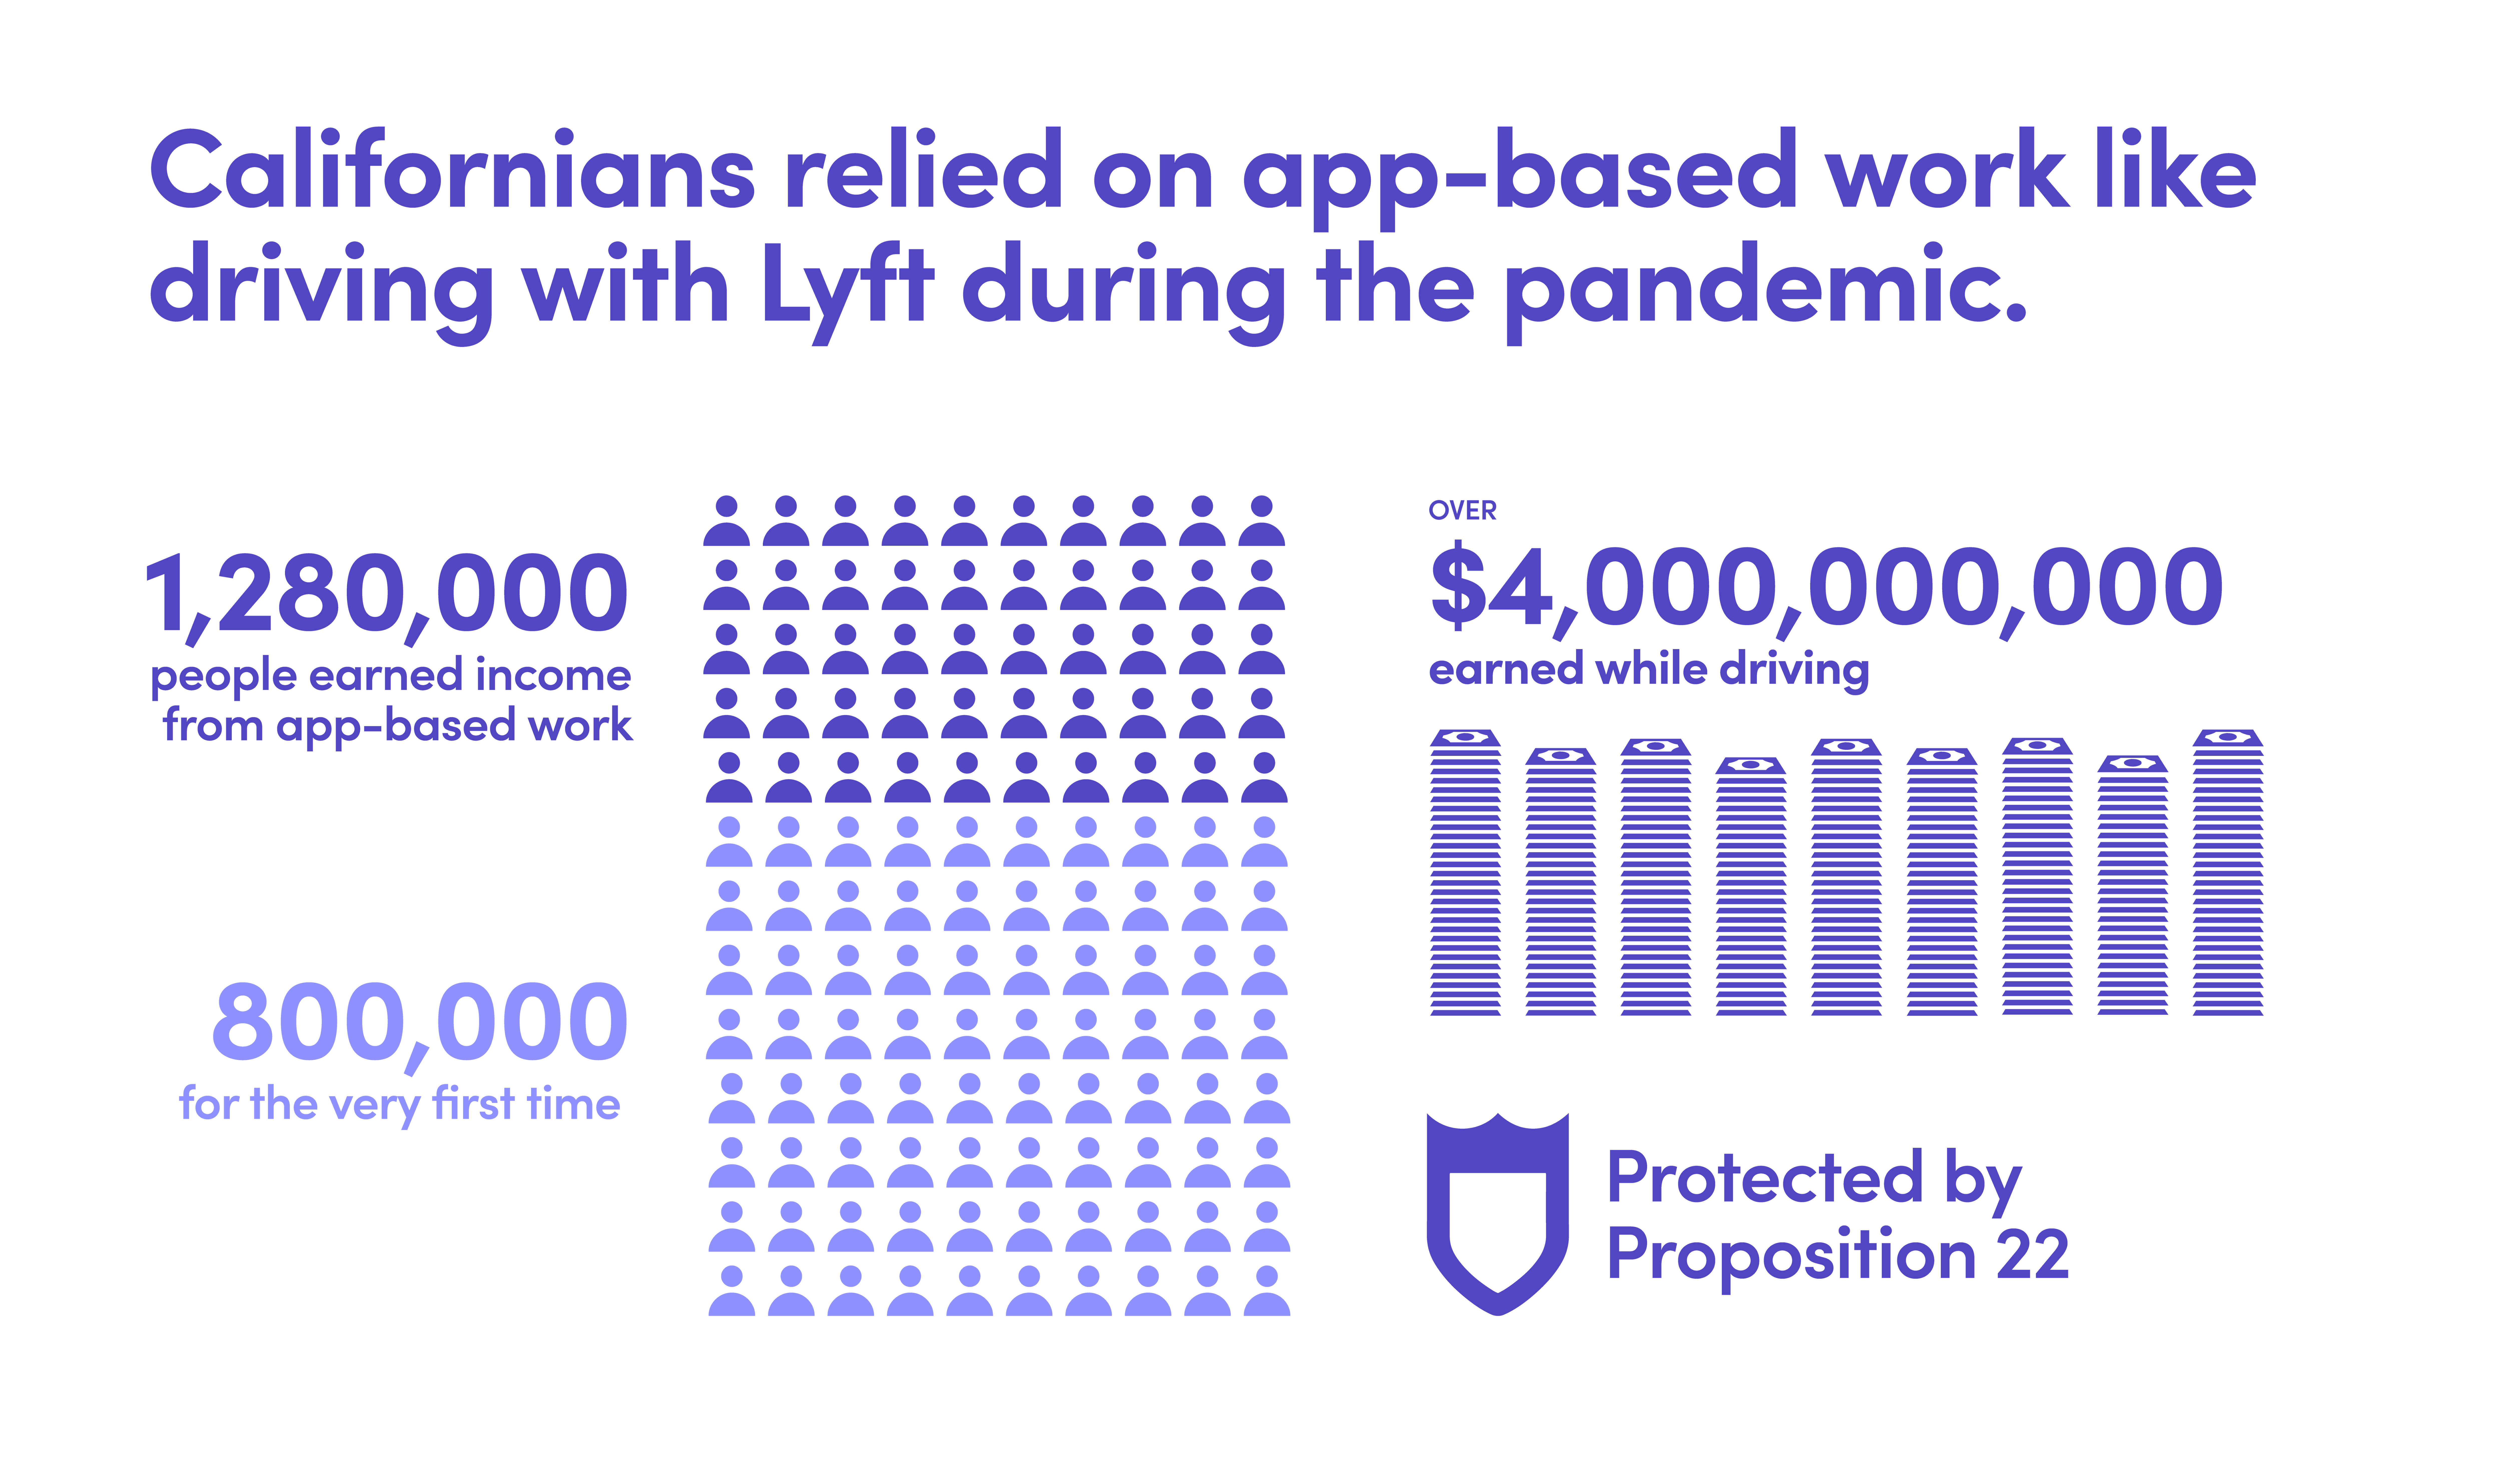 Californians relied on app-based work like driving with Lyft during the pandemic